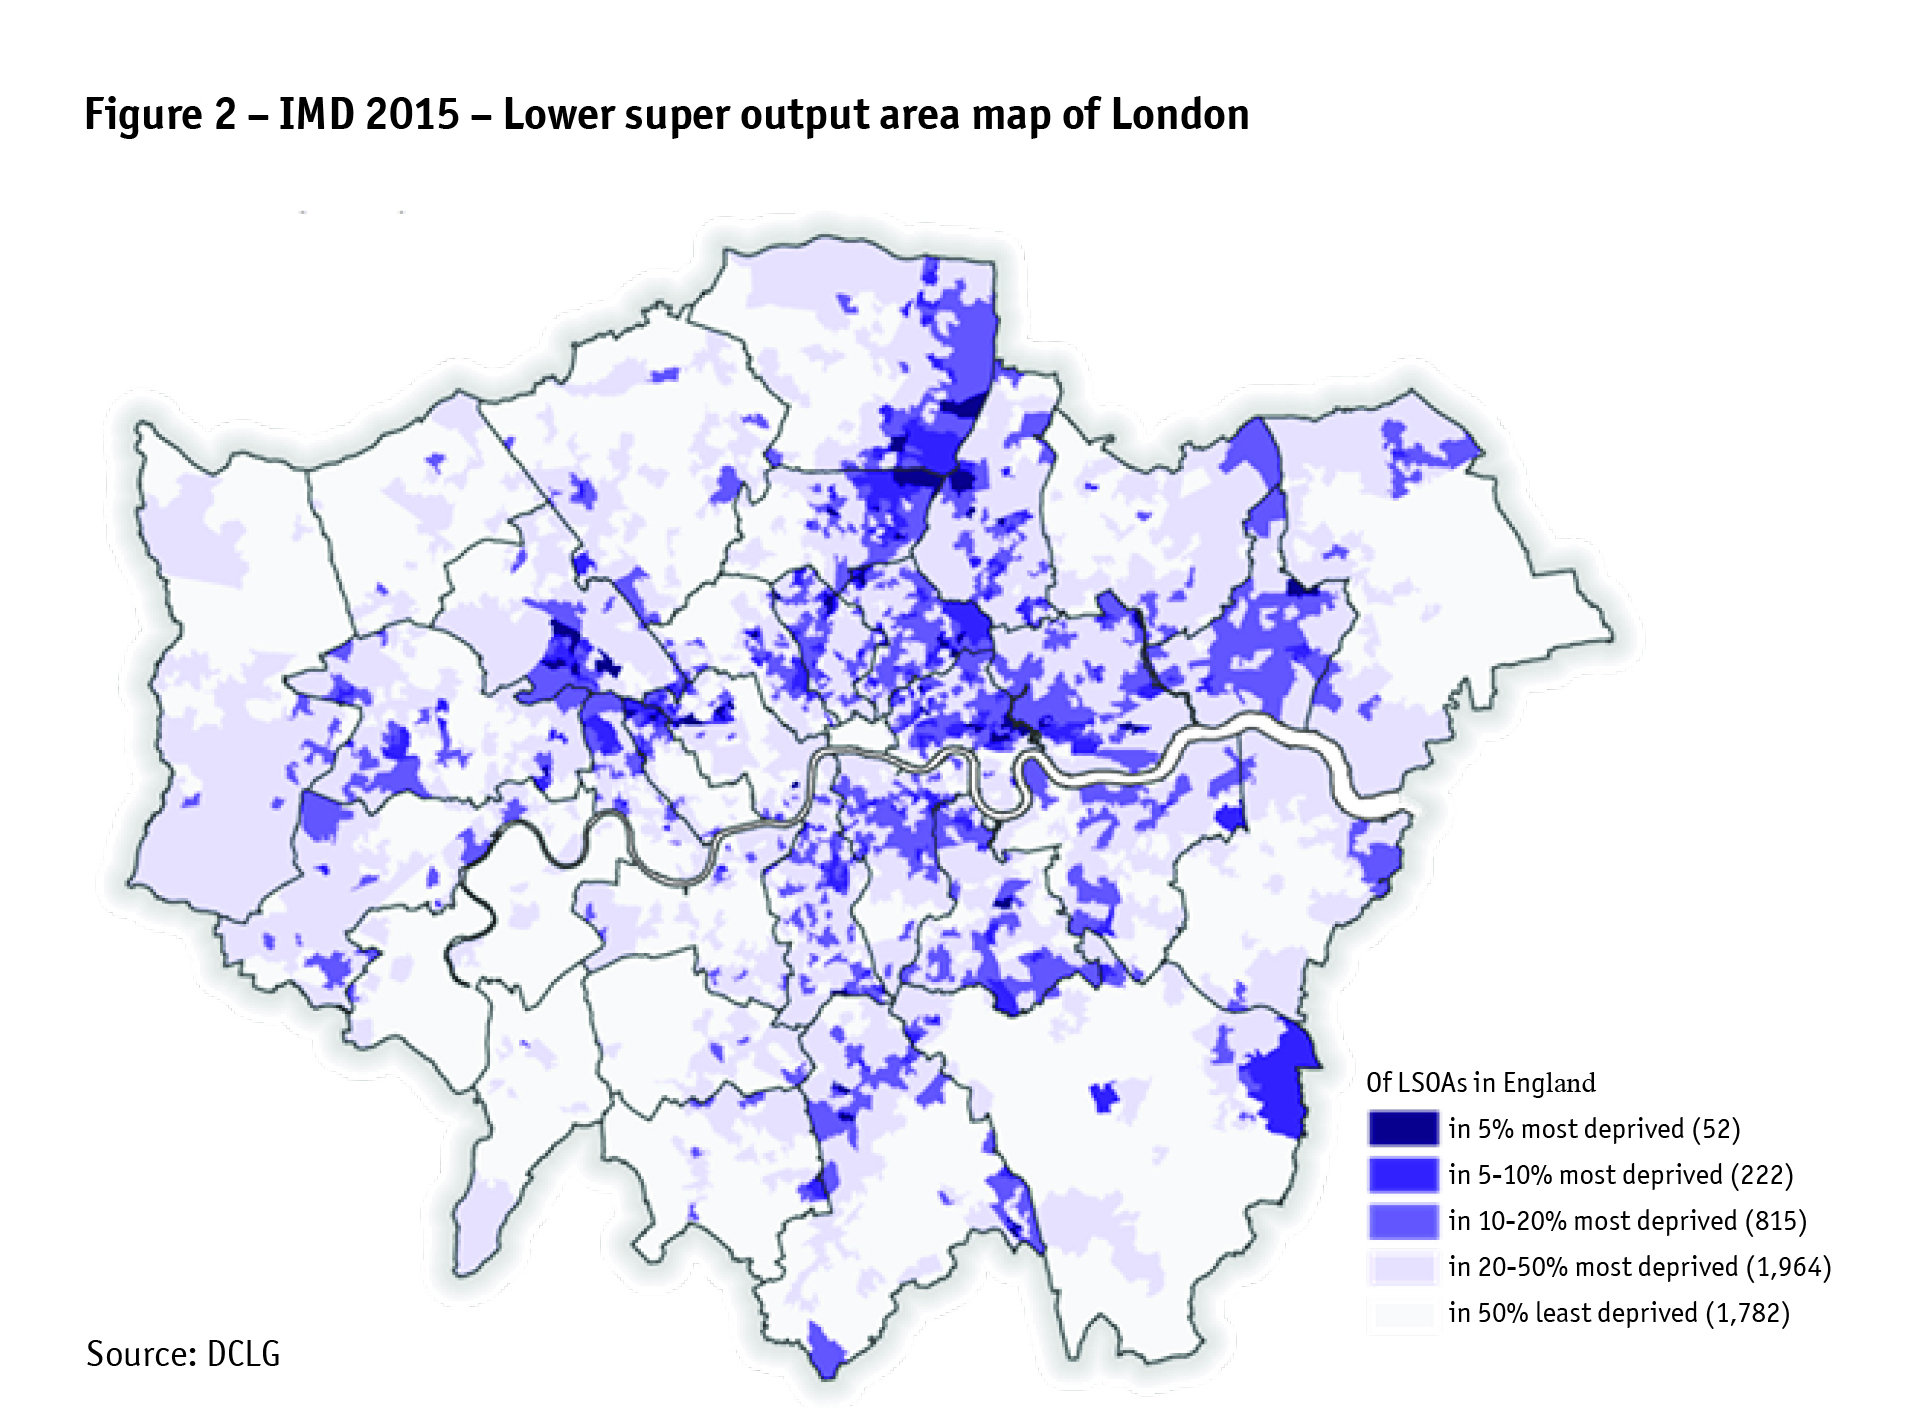 IMD 2015 - Lower super output area map of London